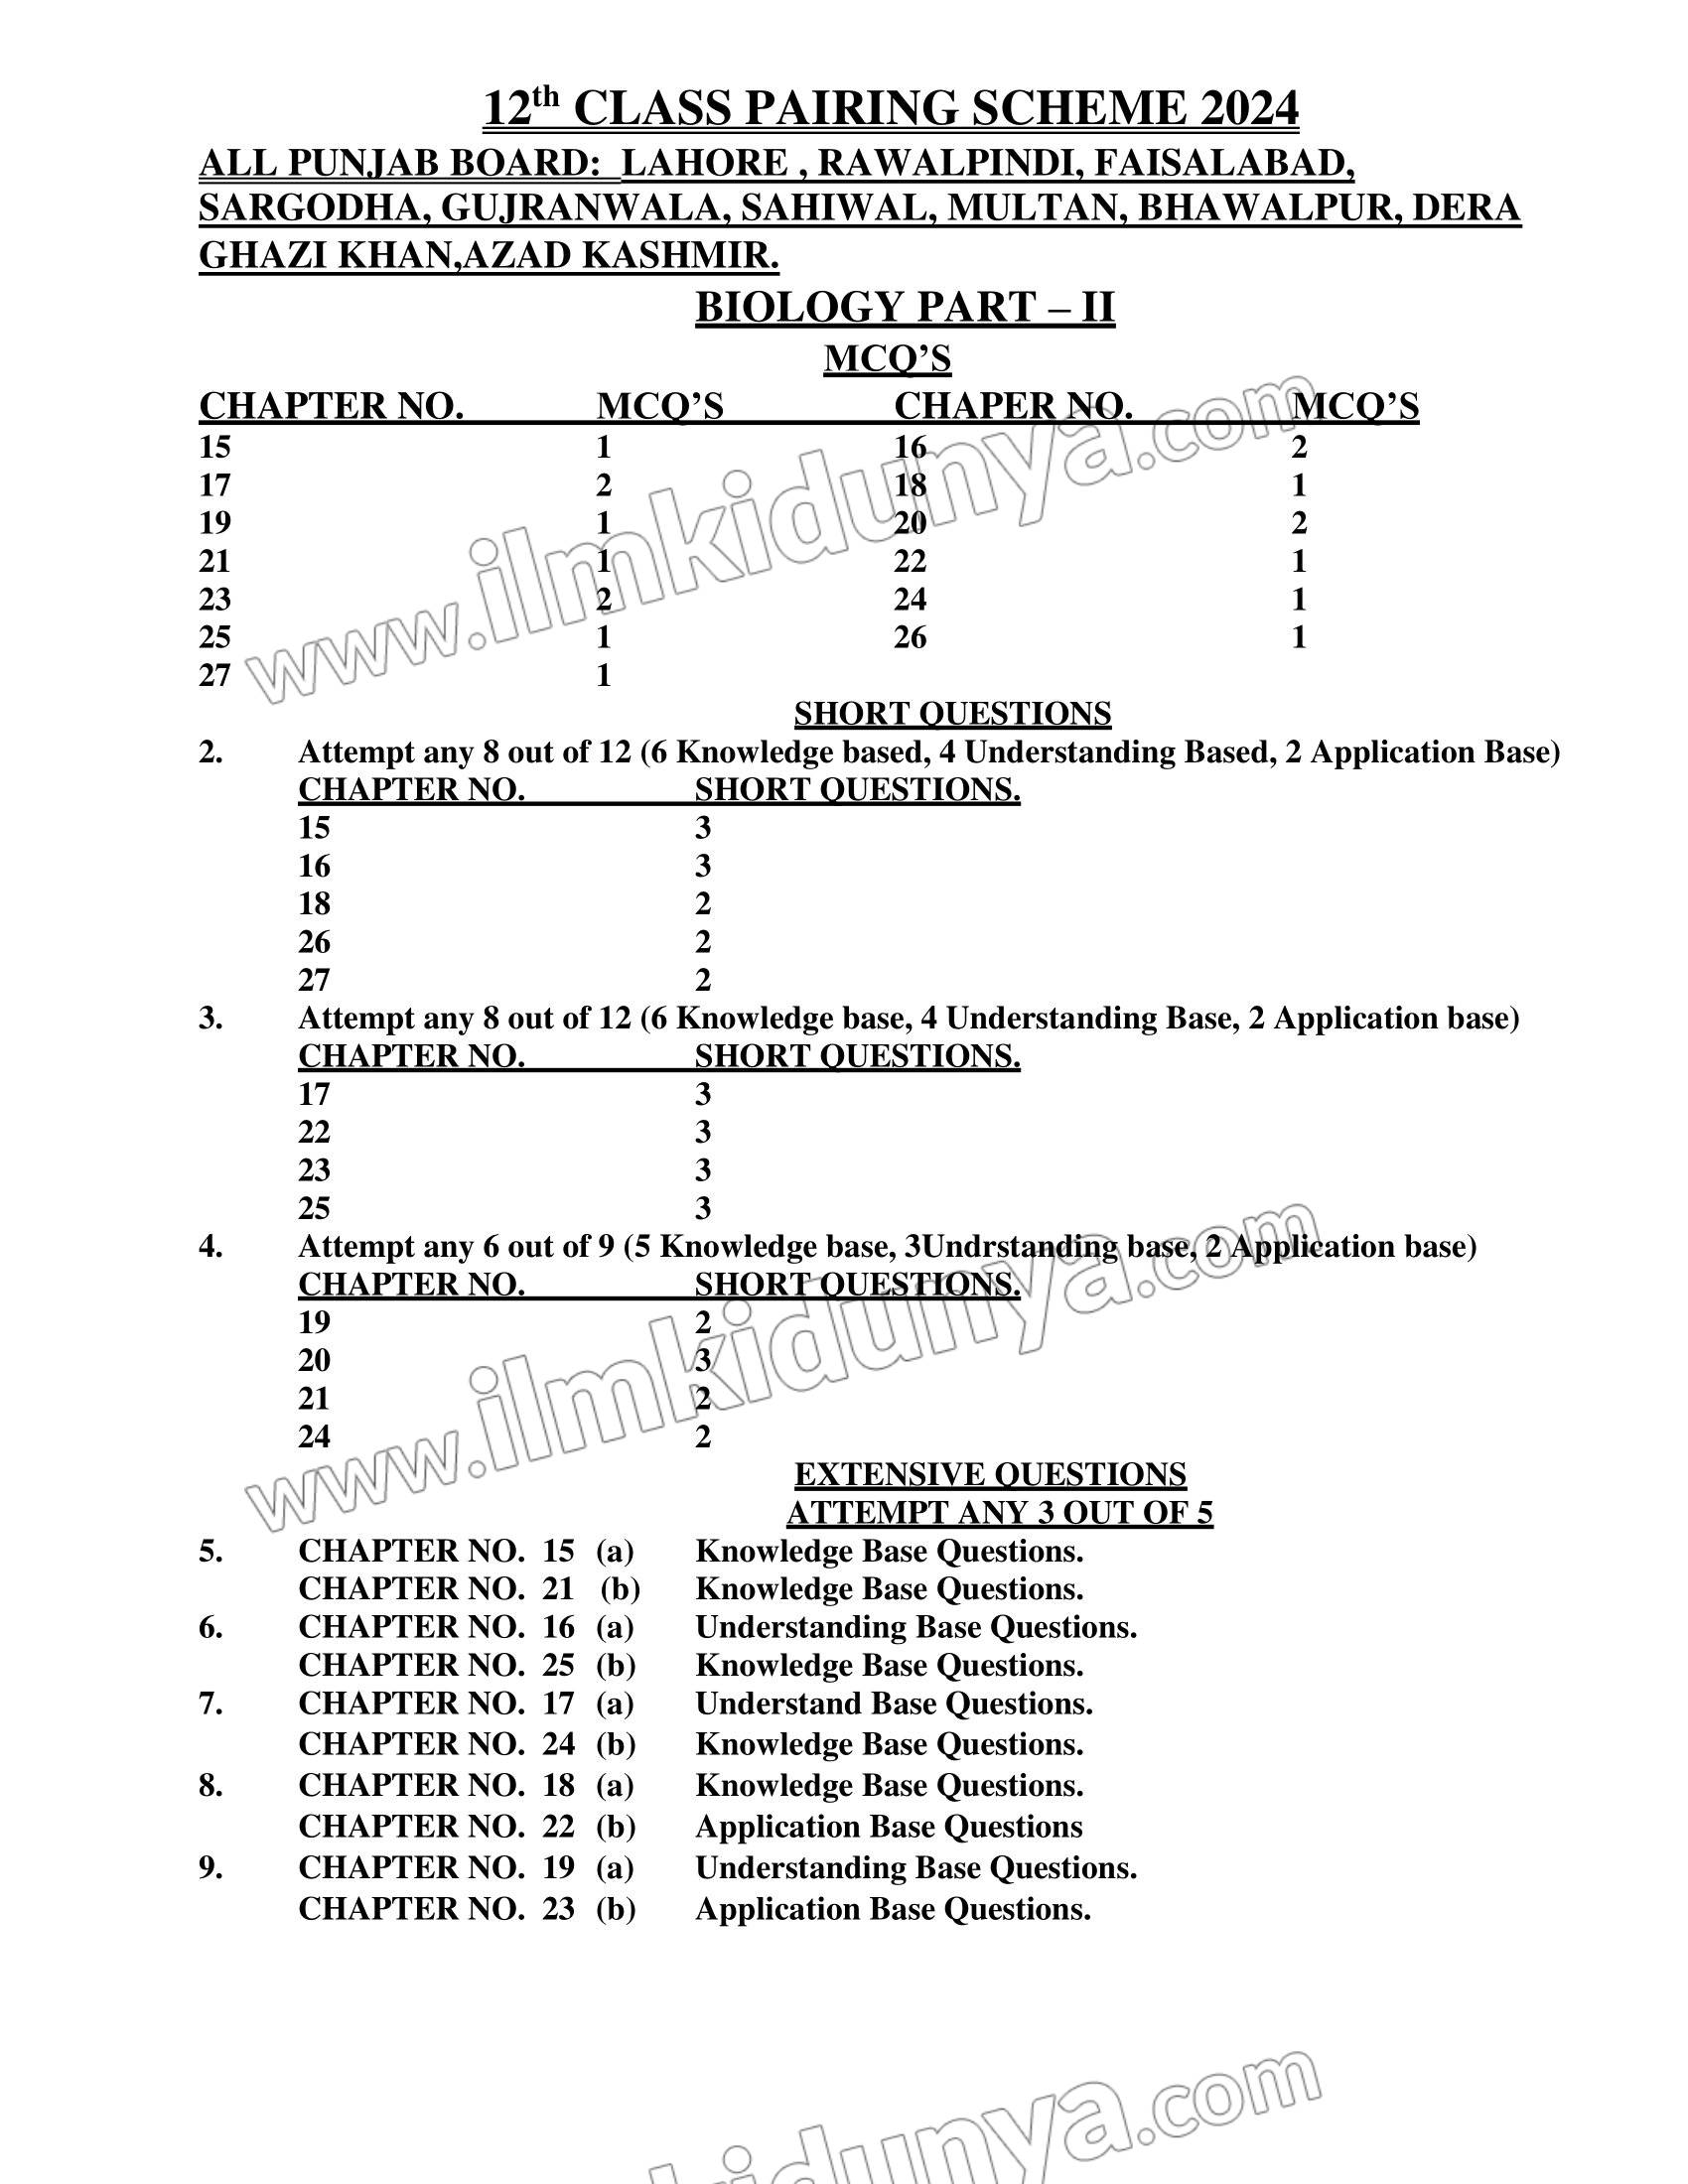 2nd Year Biology Pairing Scheme 2024 for all Punjab Board, Federal Board,  Sindh Board & KPK Boardavailable here. Inter students can get paper scheme  of 12th class biology 2024 and all other subjects.